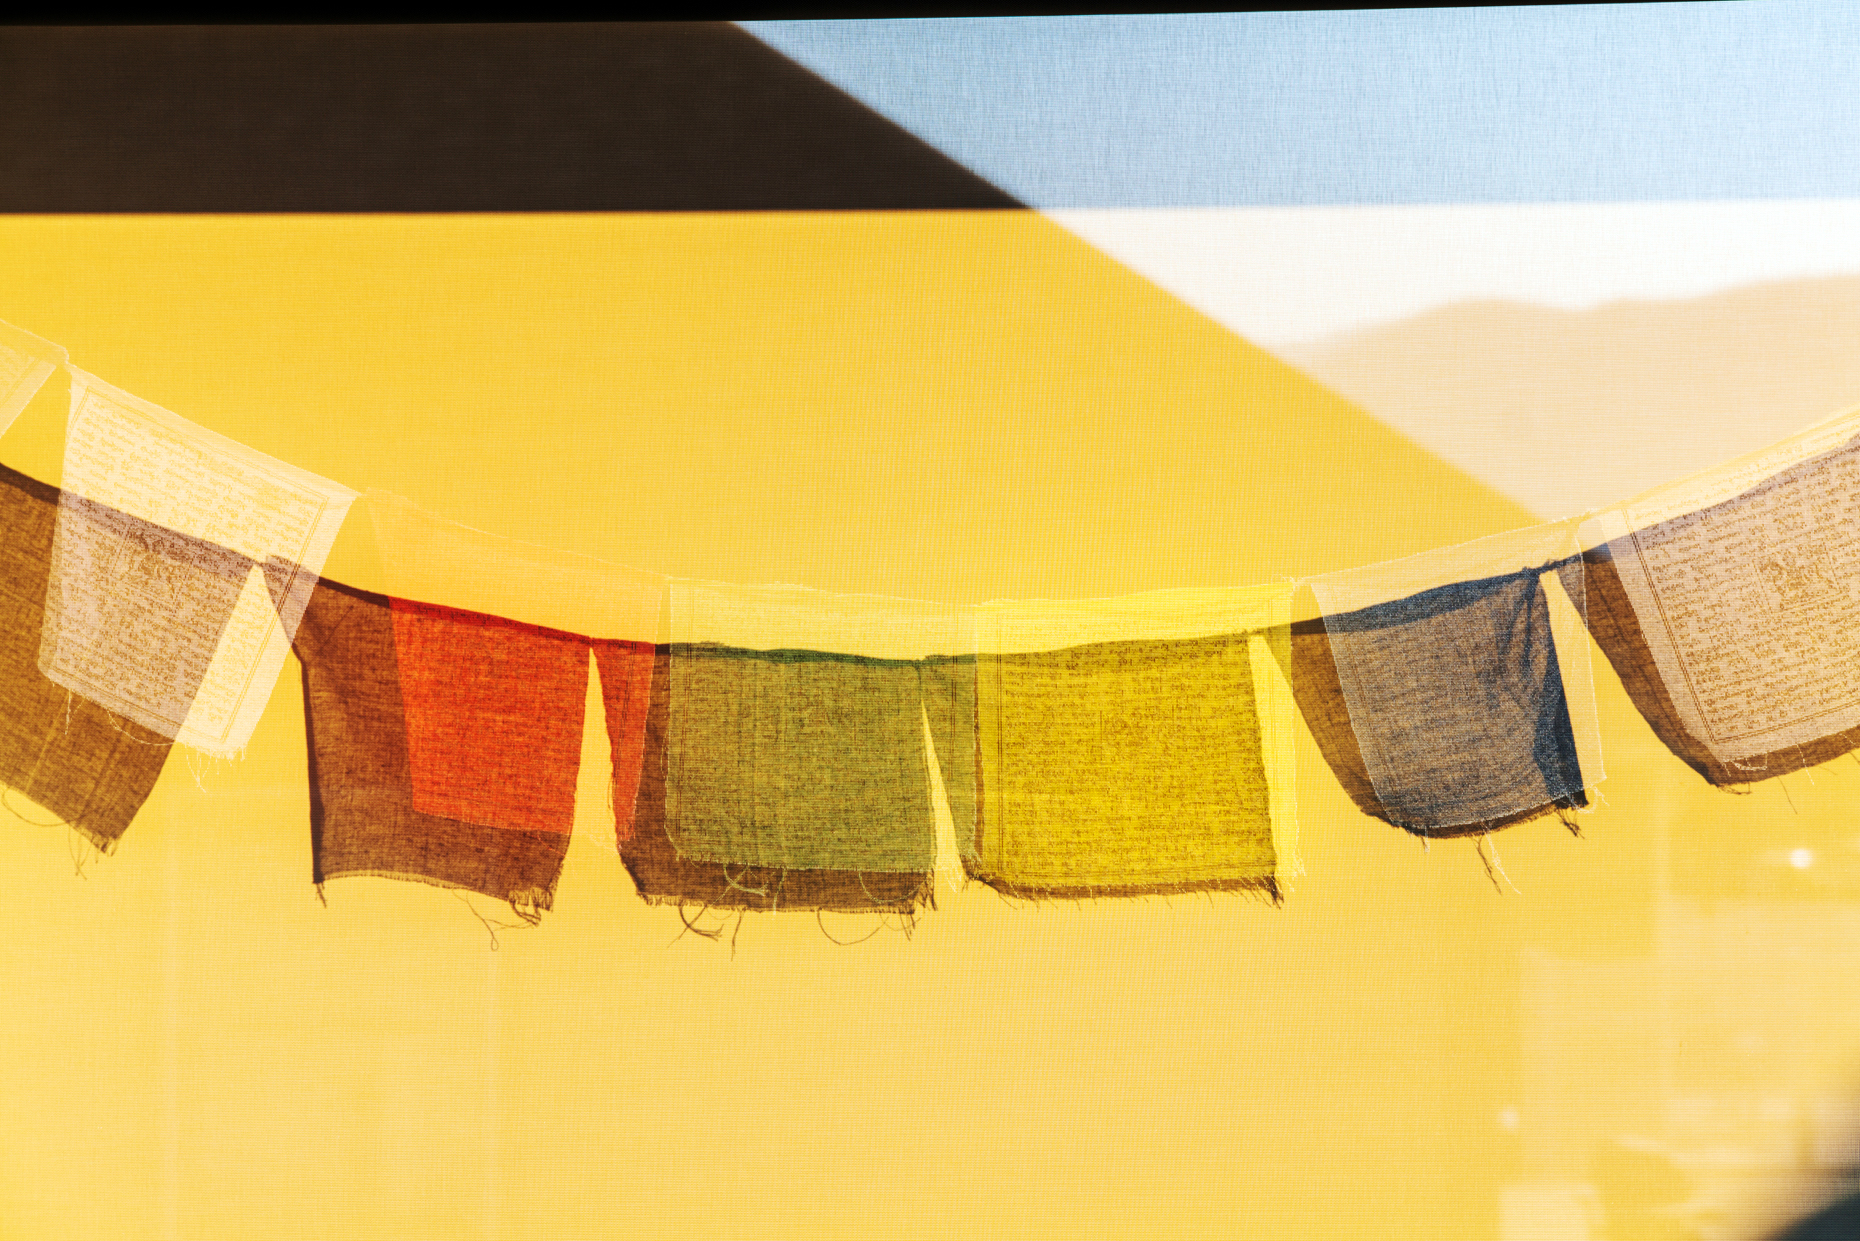 Sun casts shadows of traditional Buddhist prayer flags on a wind screen